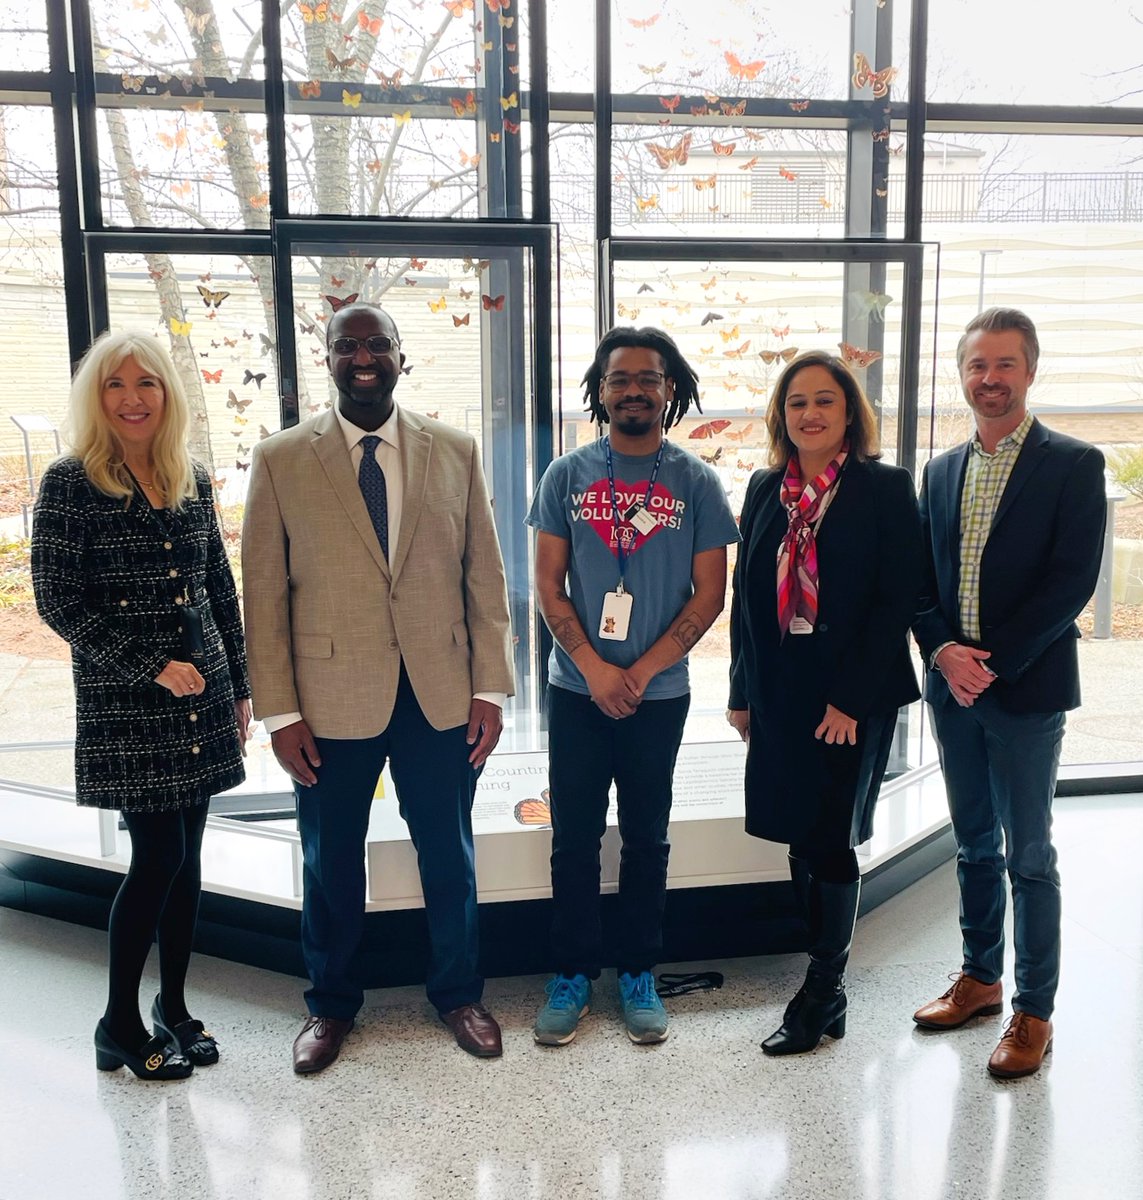 We were thrilled to welcome @DrWarrenMorgan, CEO of @CLEMetroSchools, to the Museum! It was a pleasure to see our partnership with #CMSD in action, provide a behind-the-scenes tour of the transformation project, and introduce Museum staff member, Malcolm—a former CMSD grad.